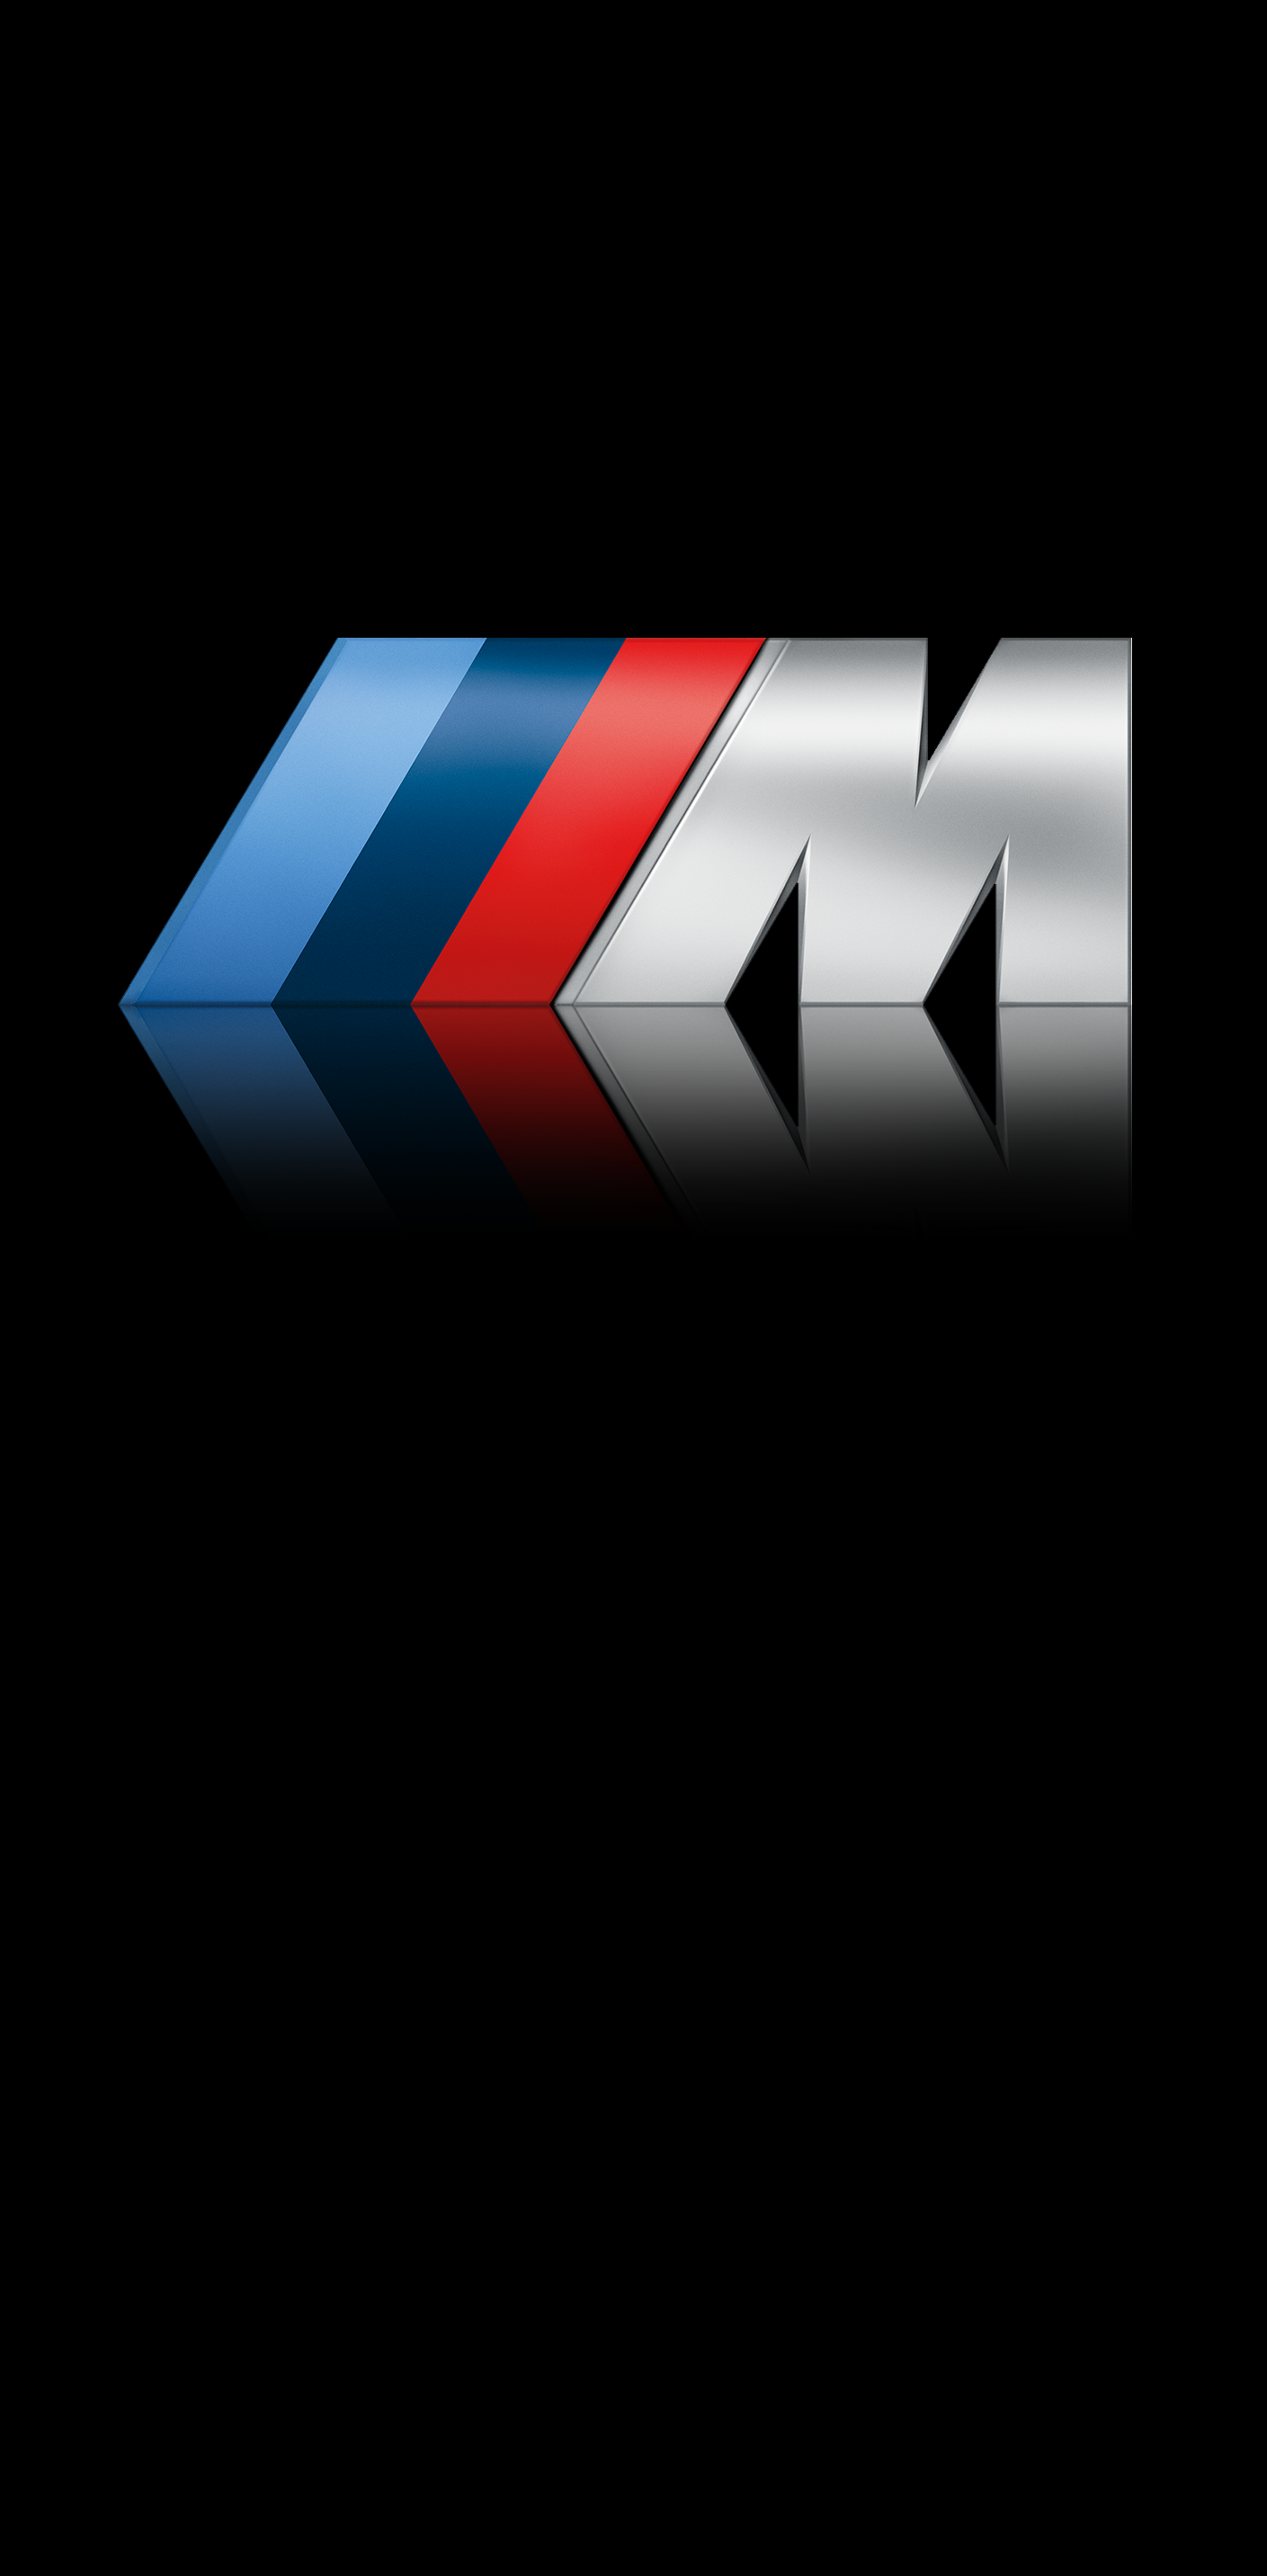 BMW ///M LOGO FOR IPHONE XS MAX [1242x2688]